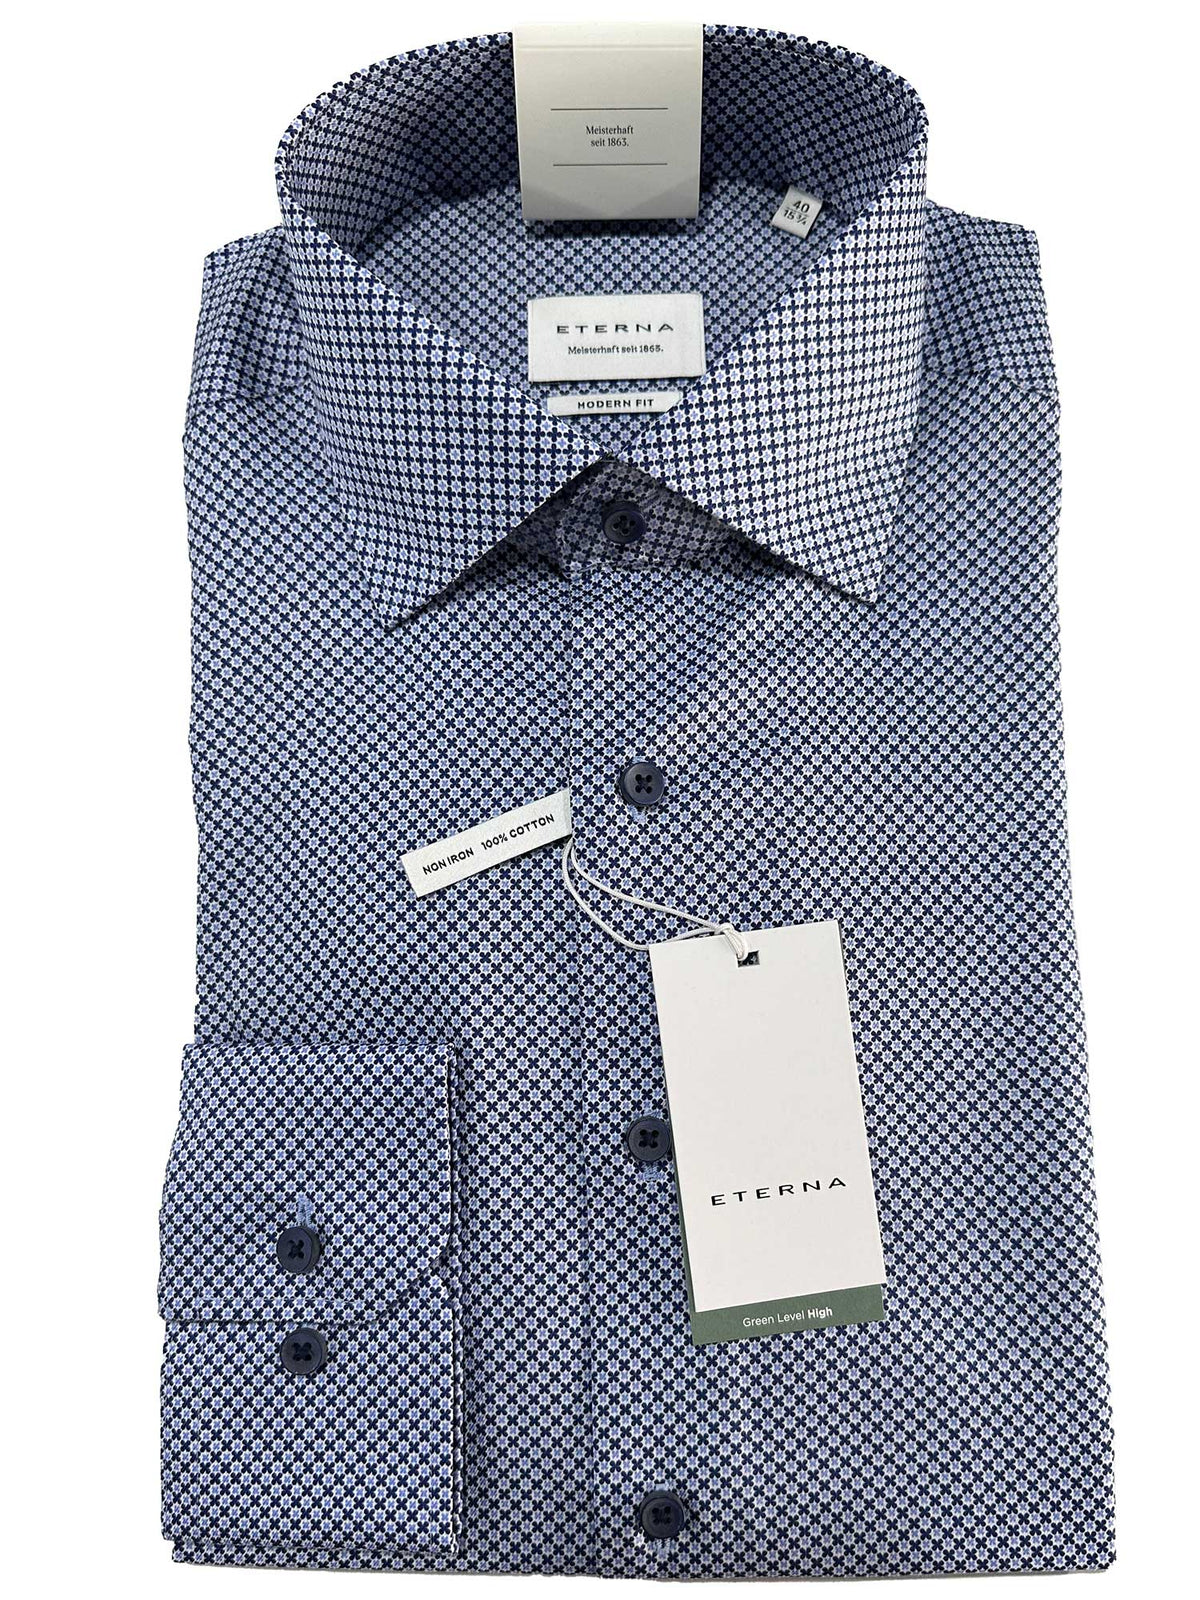 4002/16  https://harrysformenswear.com.au/products/4002-16  Eterna Shirts made with super fine cotton. ETERNA produces a wide range of high quality non-iron shirts and blouses. The extensive range includes: Comfort Fit , Modern Fit, Premium, Slim Fit and Super Slim Shirts. The ETERNA collection is based on 100 percent “ fine cotton”, a high-value and non-iron cotton. The fabric…